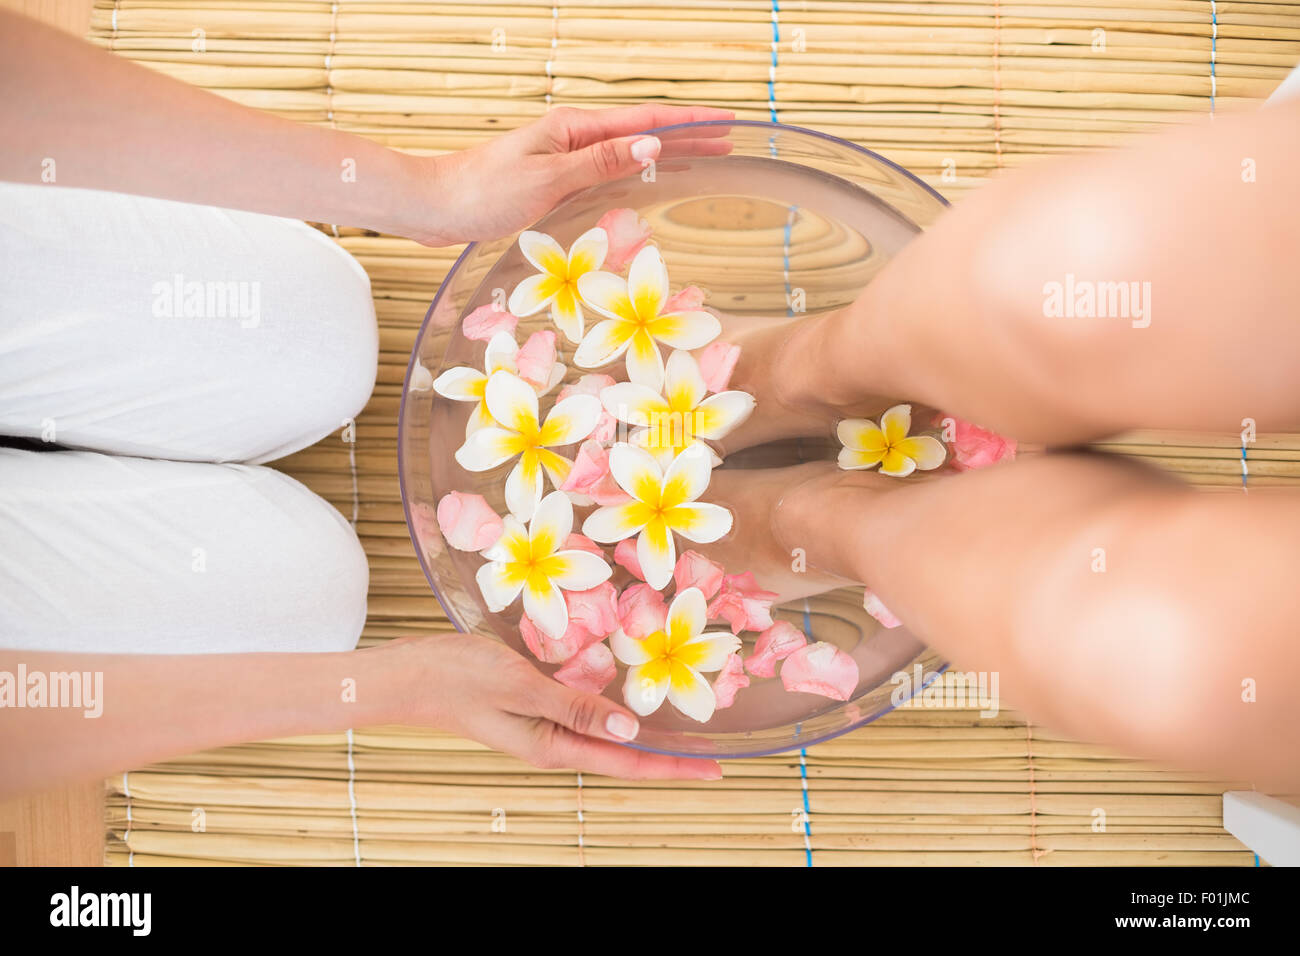 woman washing her feet in a bowl of flower Stock Photo